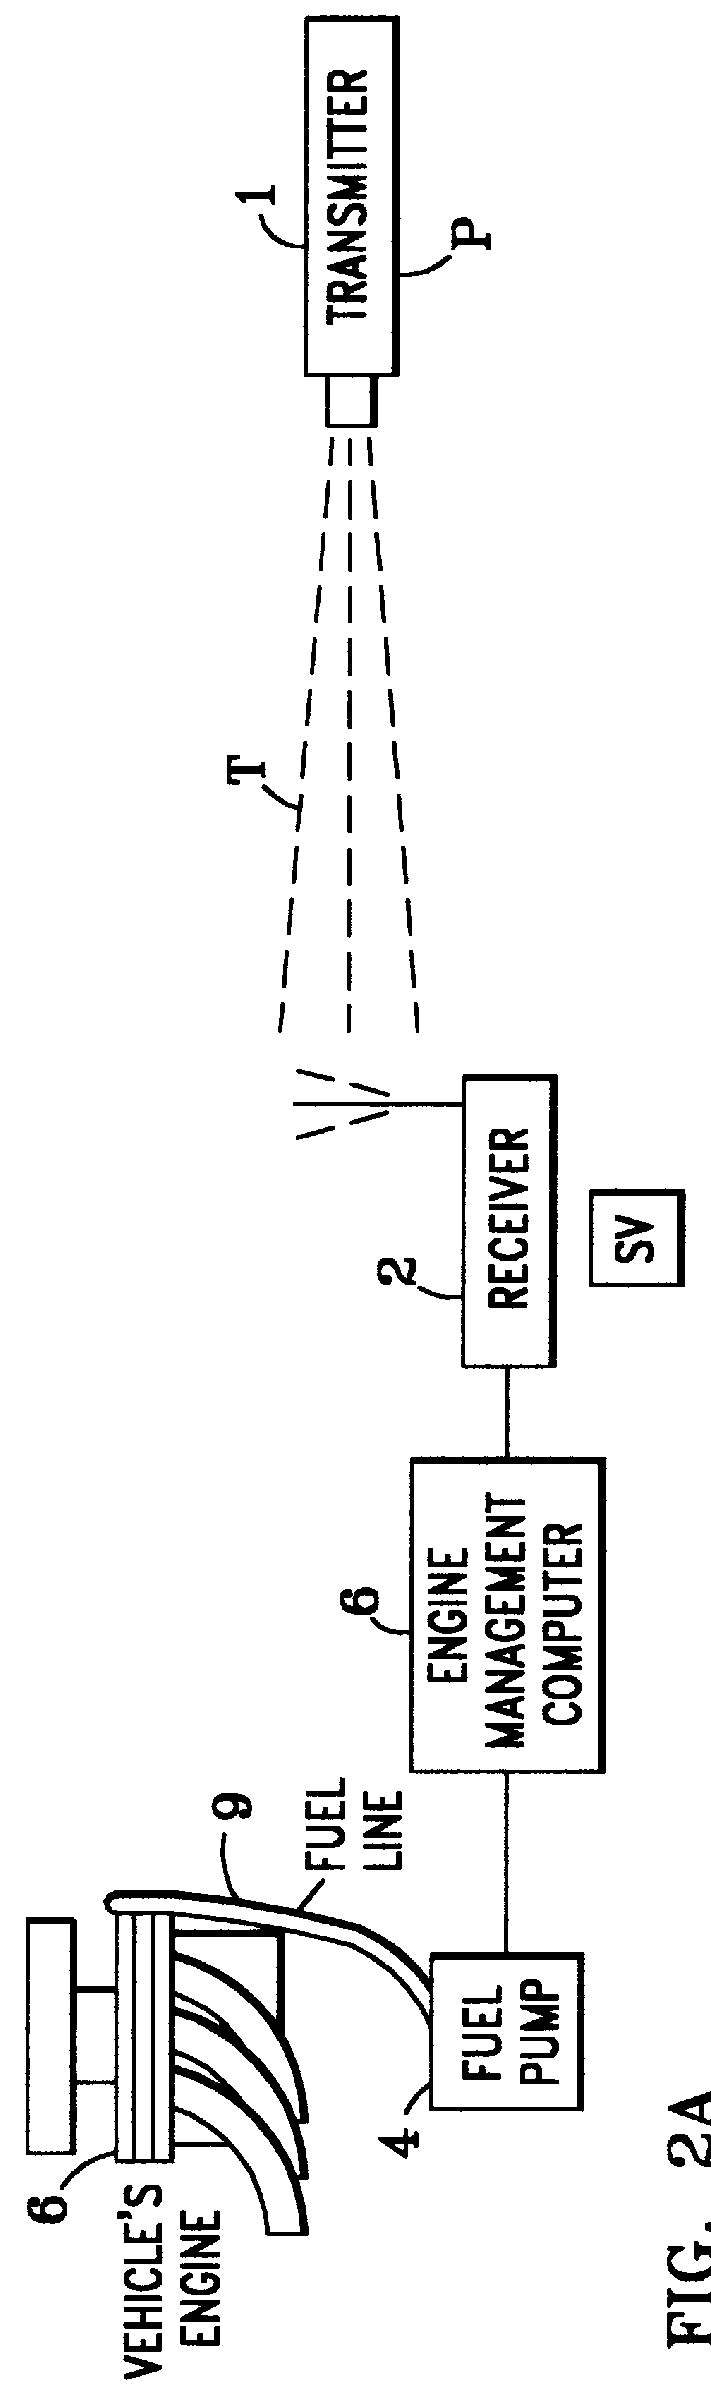 Method of and system for externally and remotely disabling stolen or unauthorized operated vehicles by pursuing police and the like